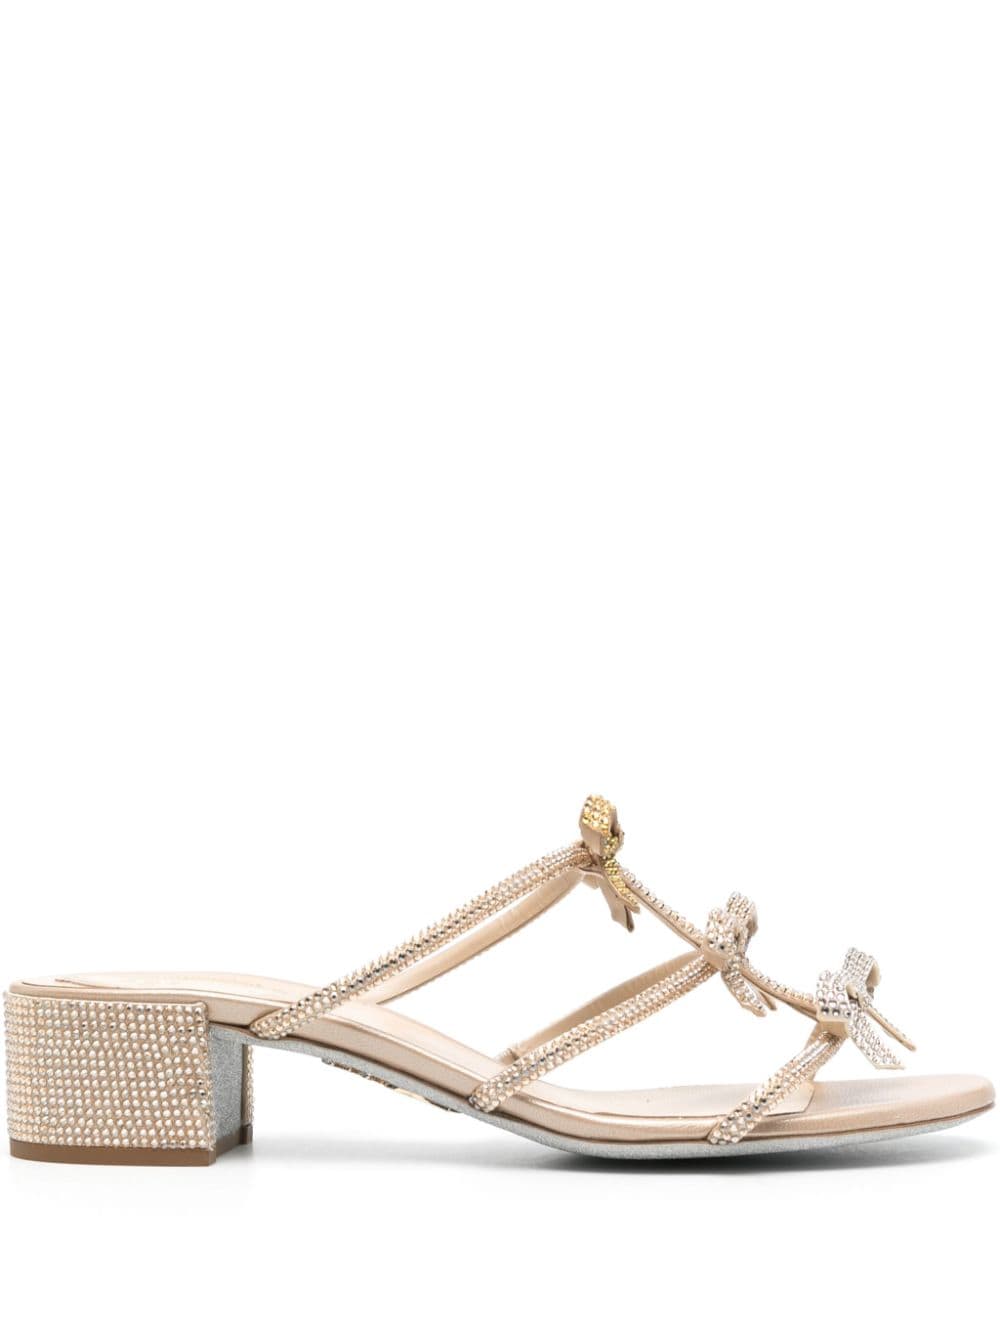 René Caovilla Caterina Bow And Crystal-embellished Satin Mules In Neutrals